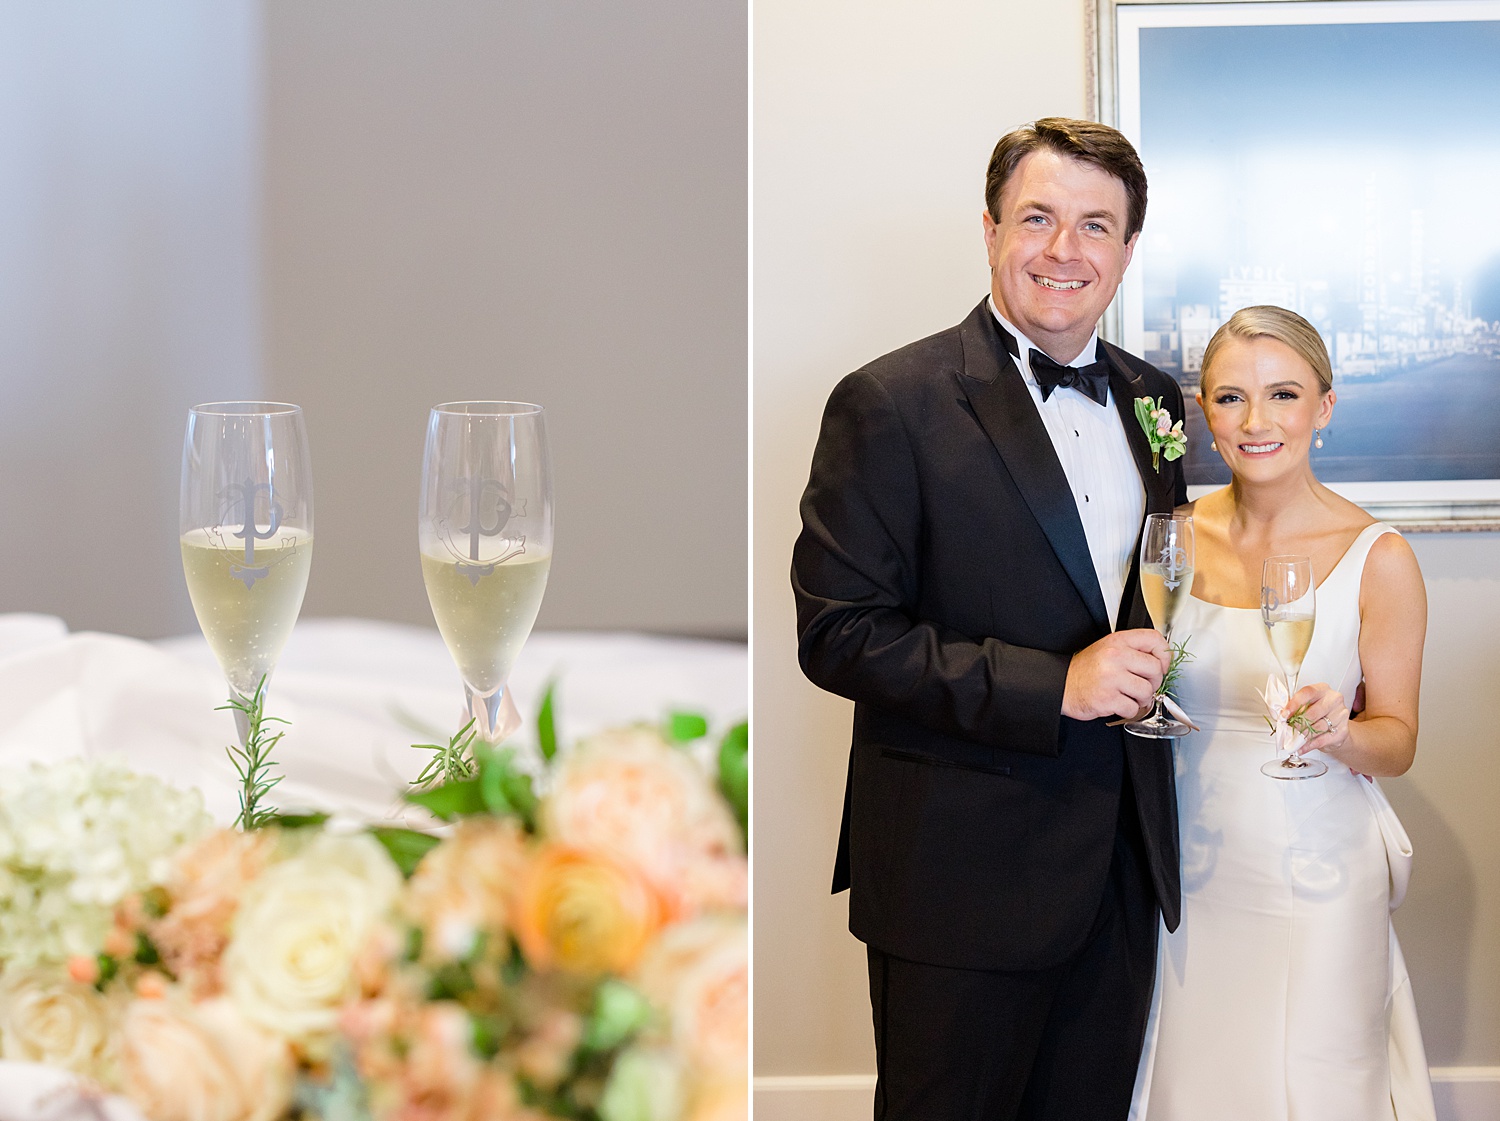 newlyweds toast with champagne at wedding reception